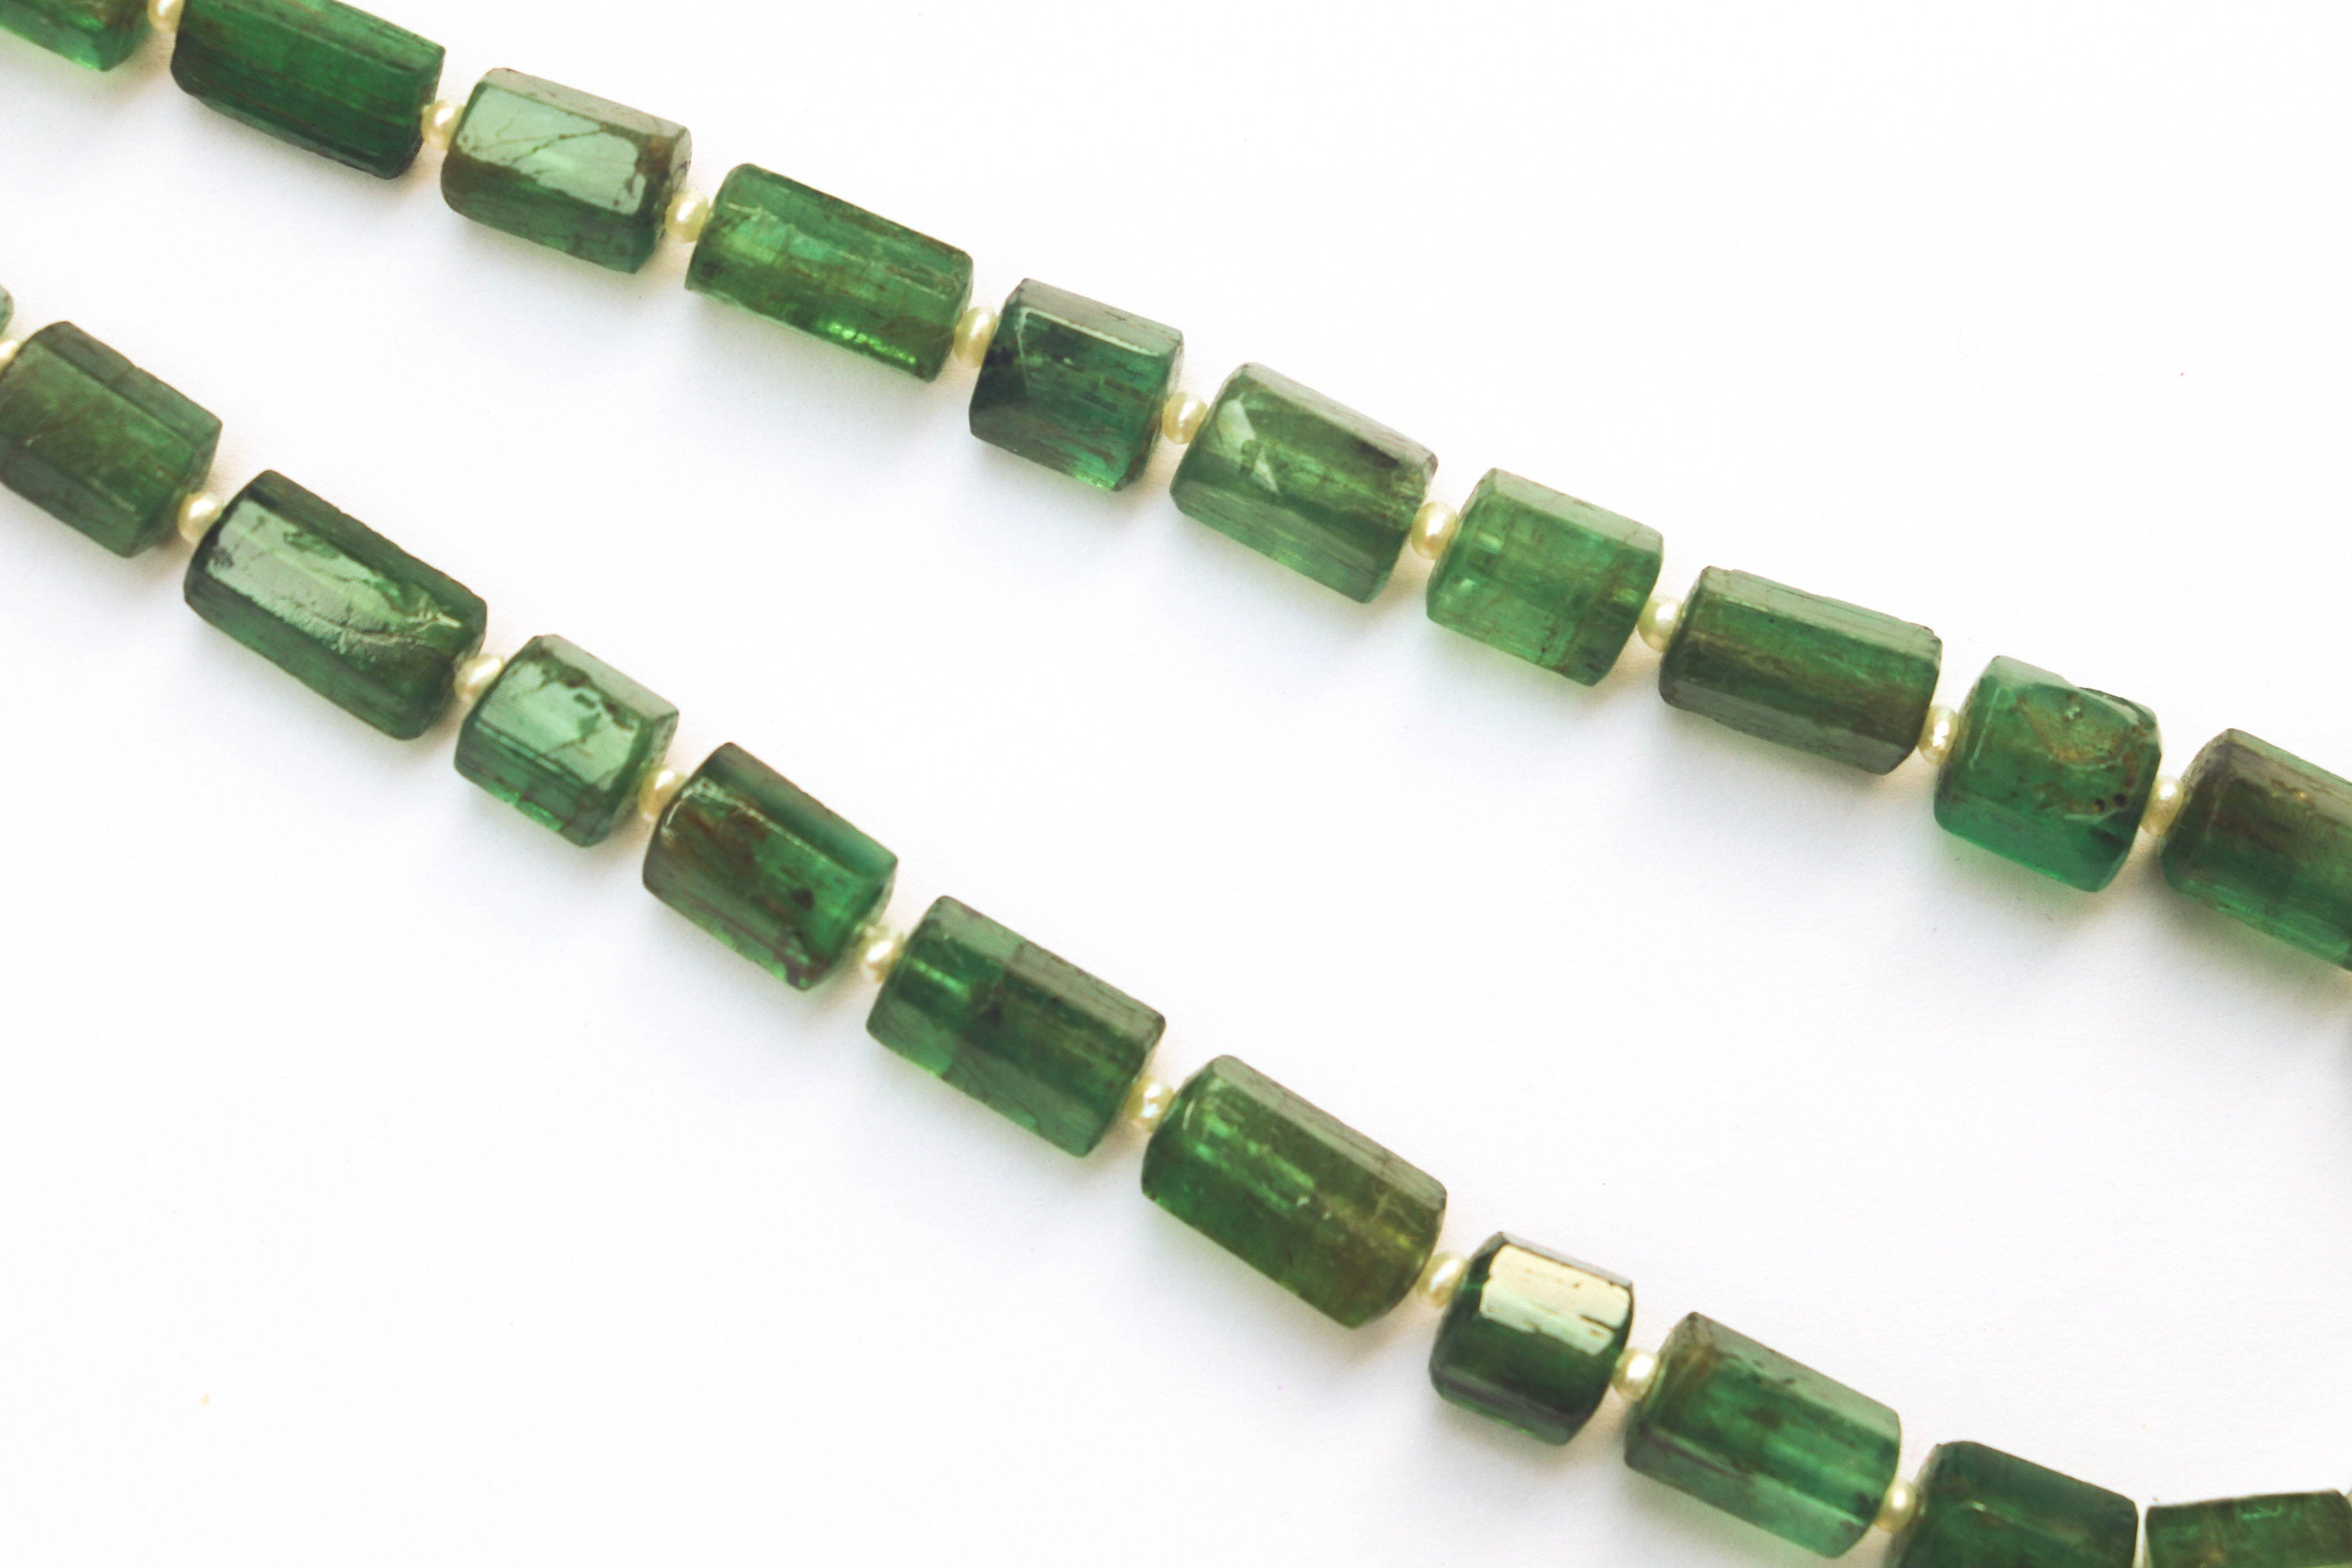 Emerald Beads Geometrical cut Cylinder shape | 16 inch | Zambian Emerald faceted Beads | Natural Emerald Gemstone beads for Jewelry making | Beadsforyourjewelry